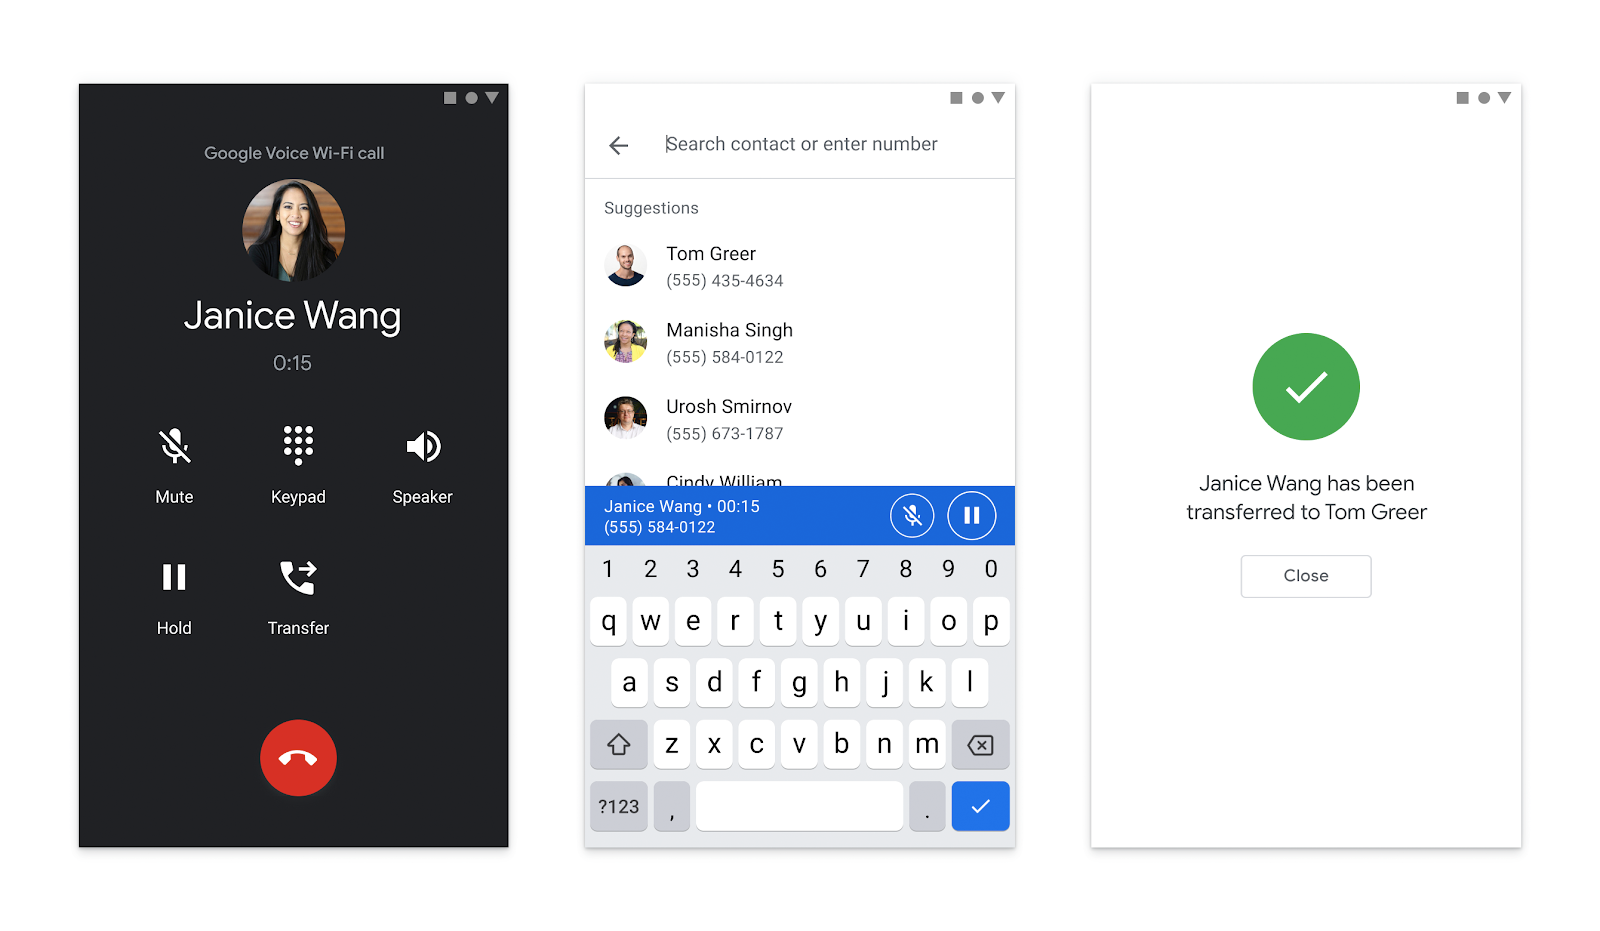 Google Voice is now available in Gmail for G Suite members